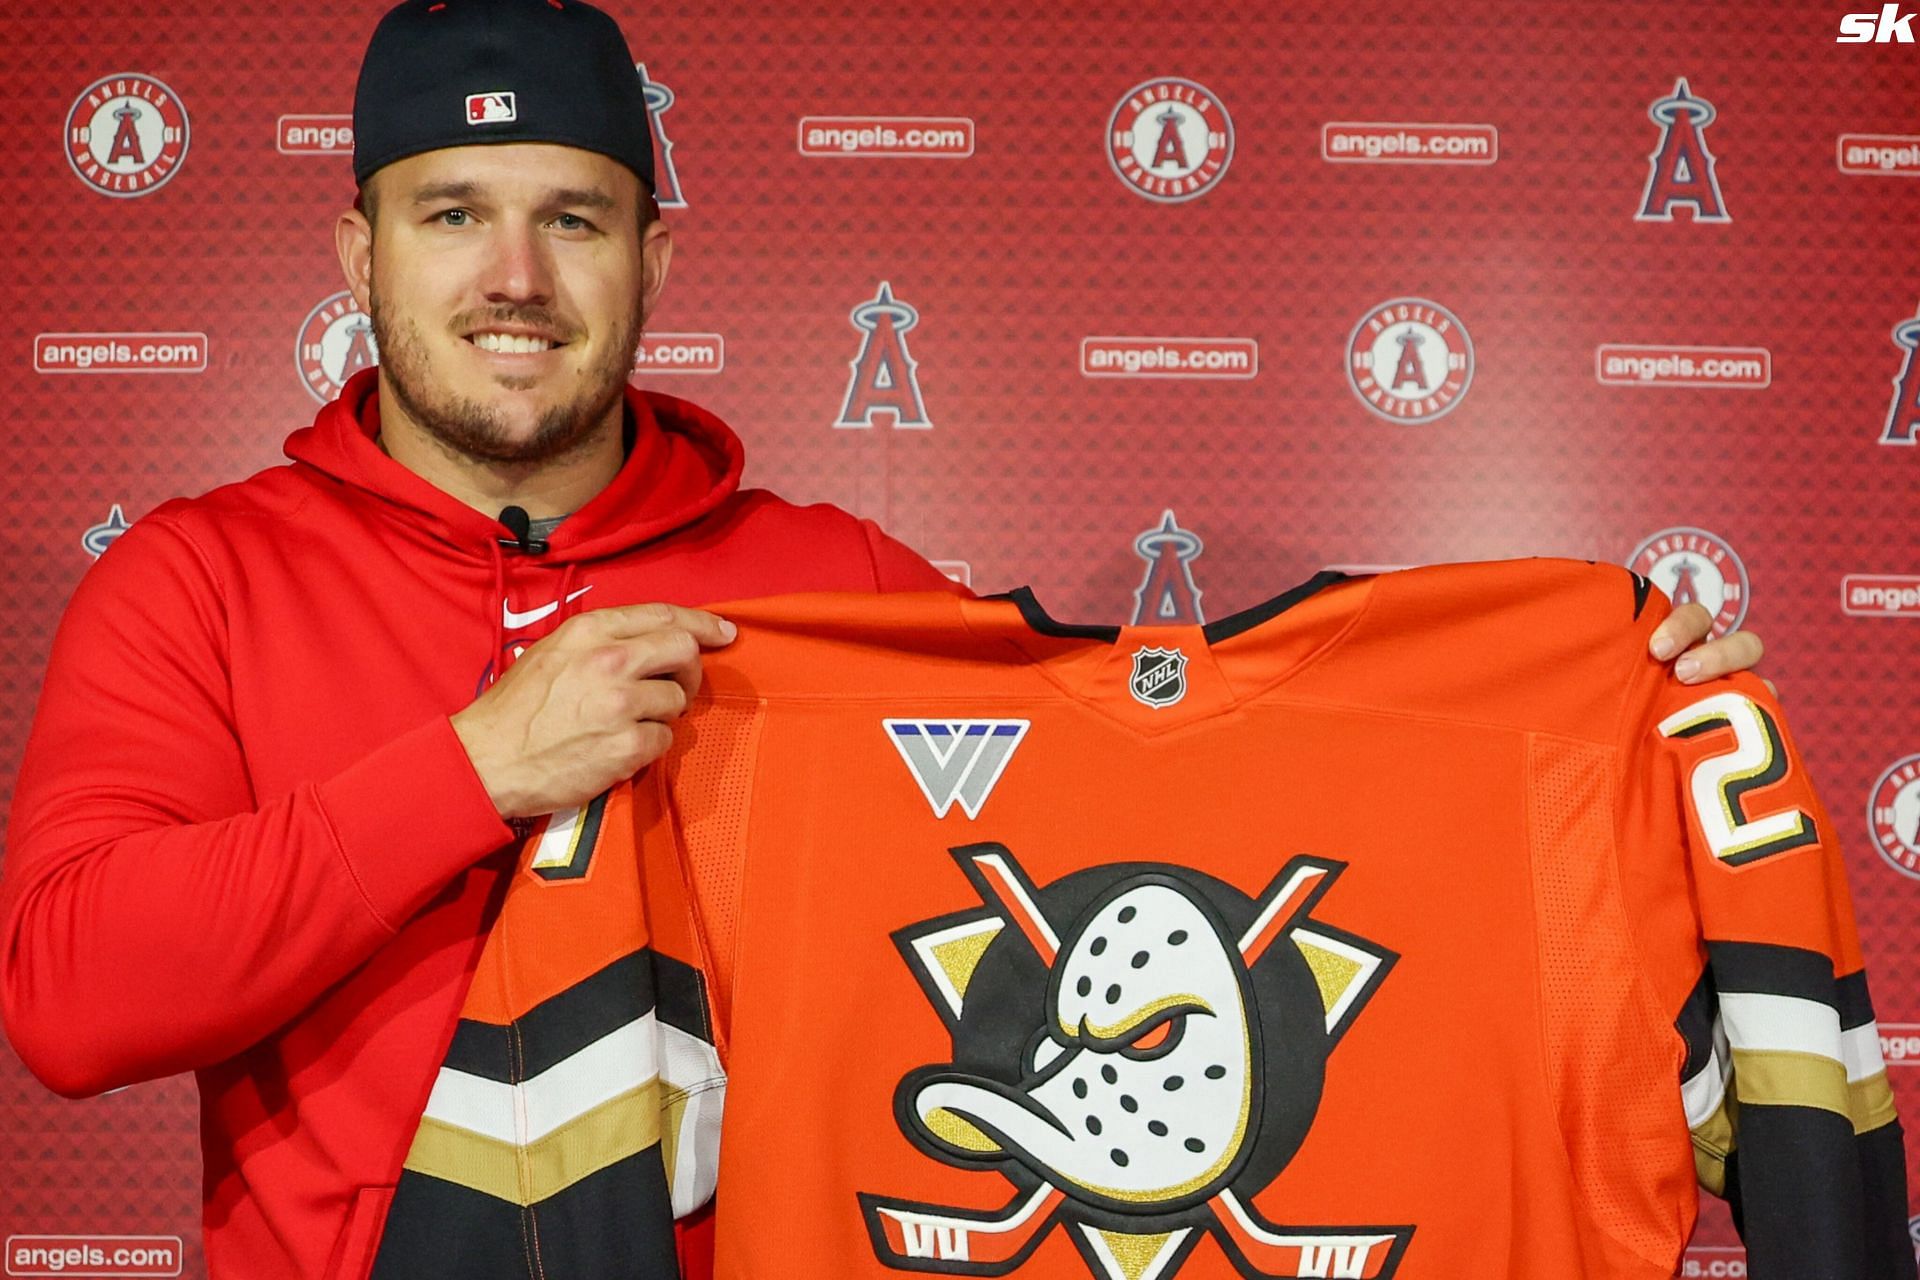  Mike Trout expresses delight on revamped Anaheim Ducks jerseys embodying Orange County colors (Image source - Anaheim Ducks Twitter/X)